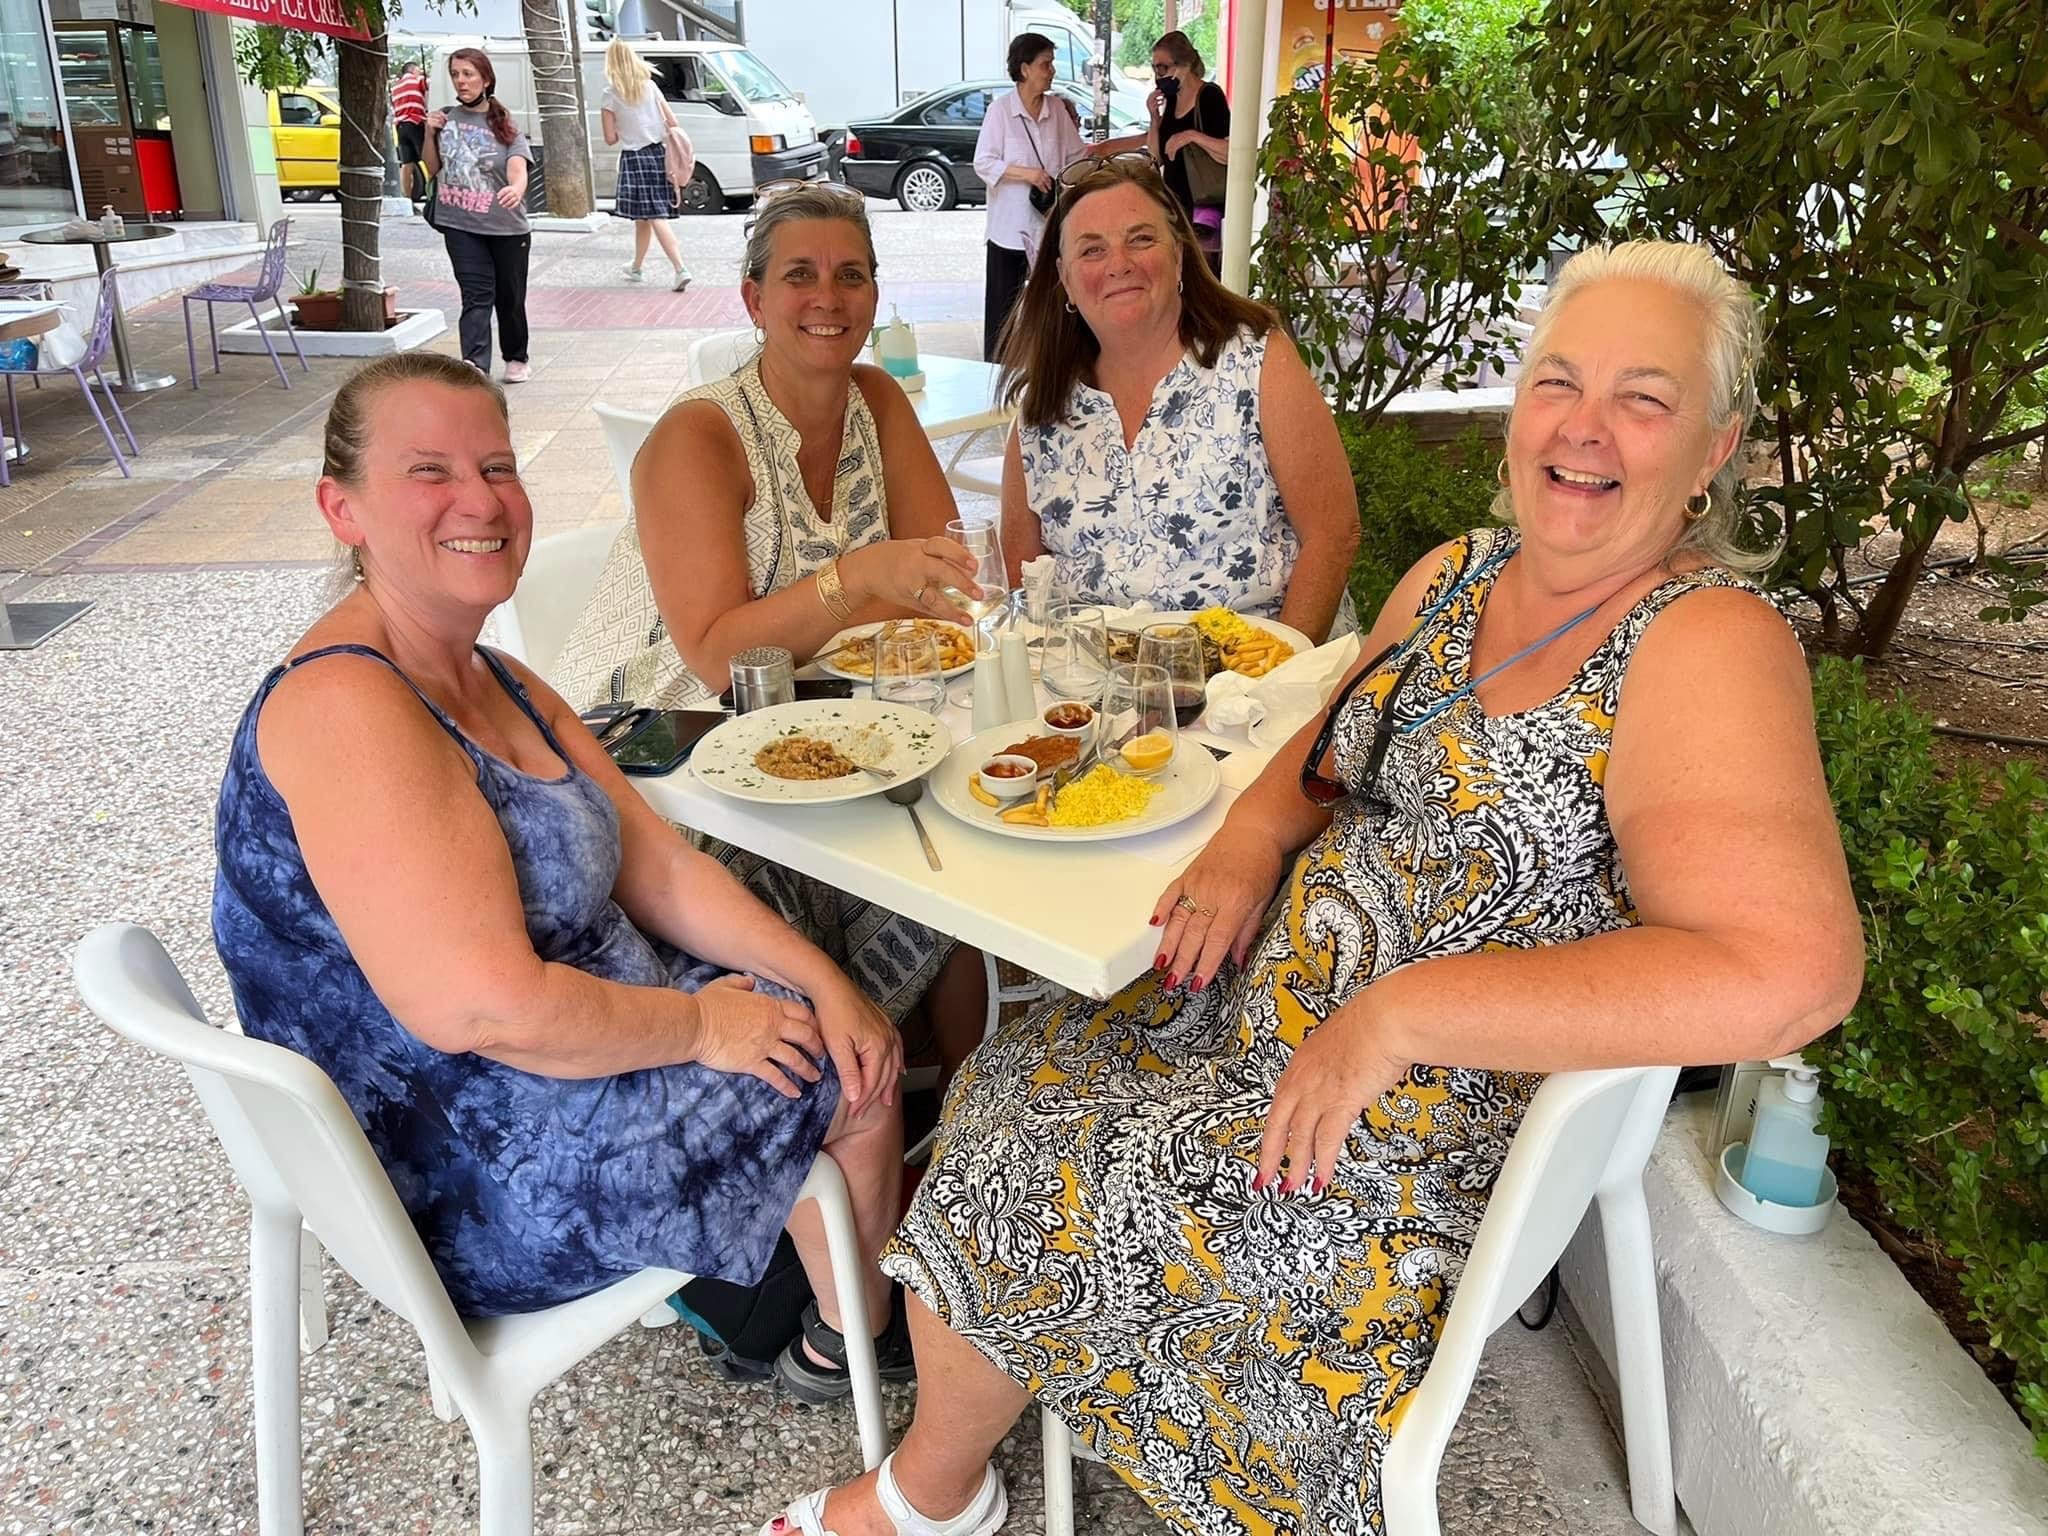 From left, Janet Simmerman, Greta O’Dell, Susan Dunn and Charlene Wood are pictured in Greece this summer.